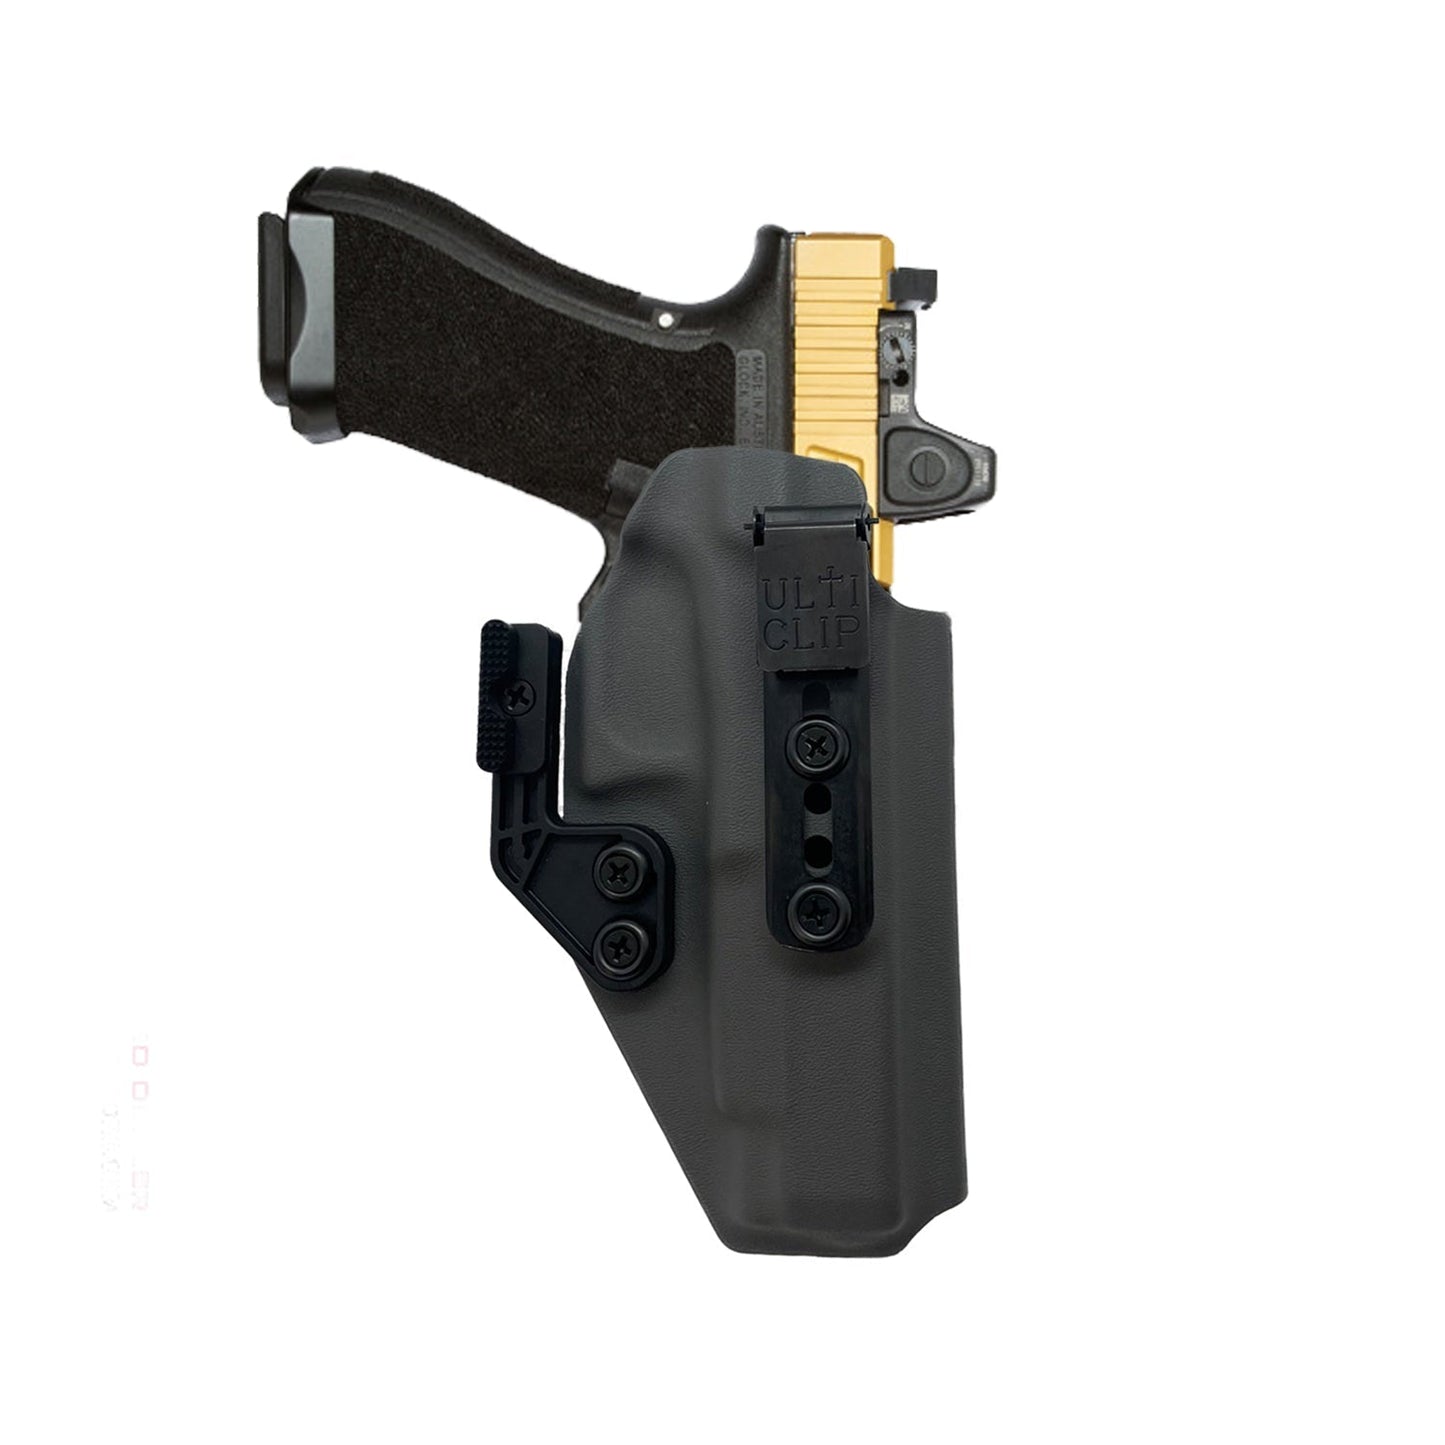 GLOCK 21 WIth (ULTI-CLIP 3) IWB (Inside The Waistband Holster)